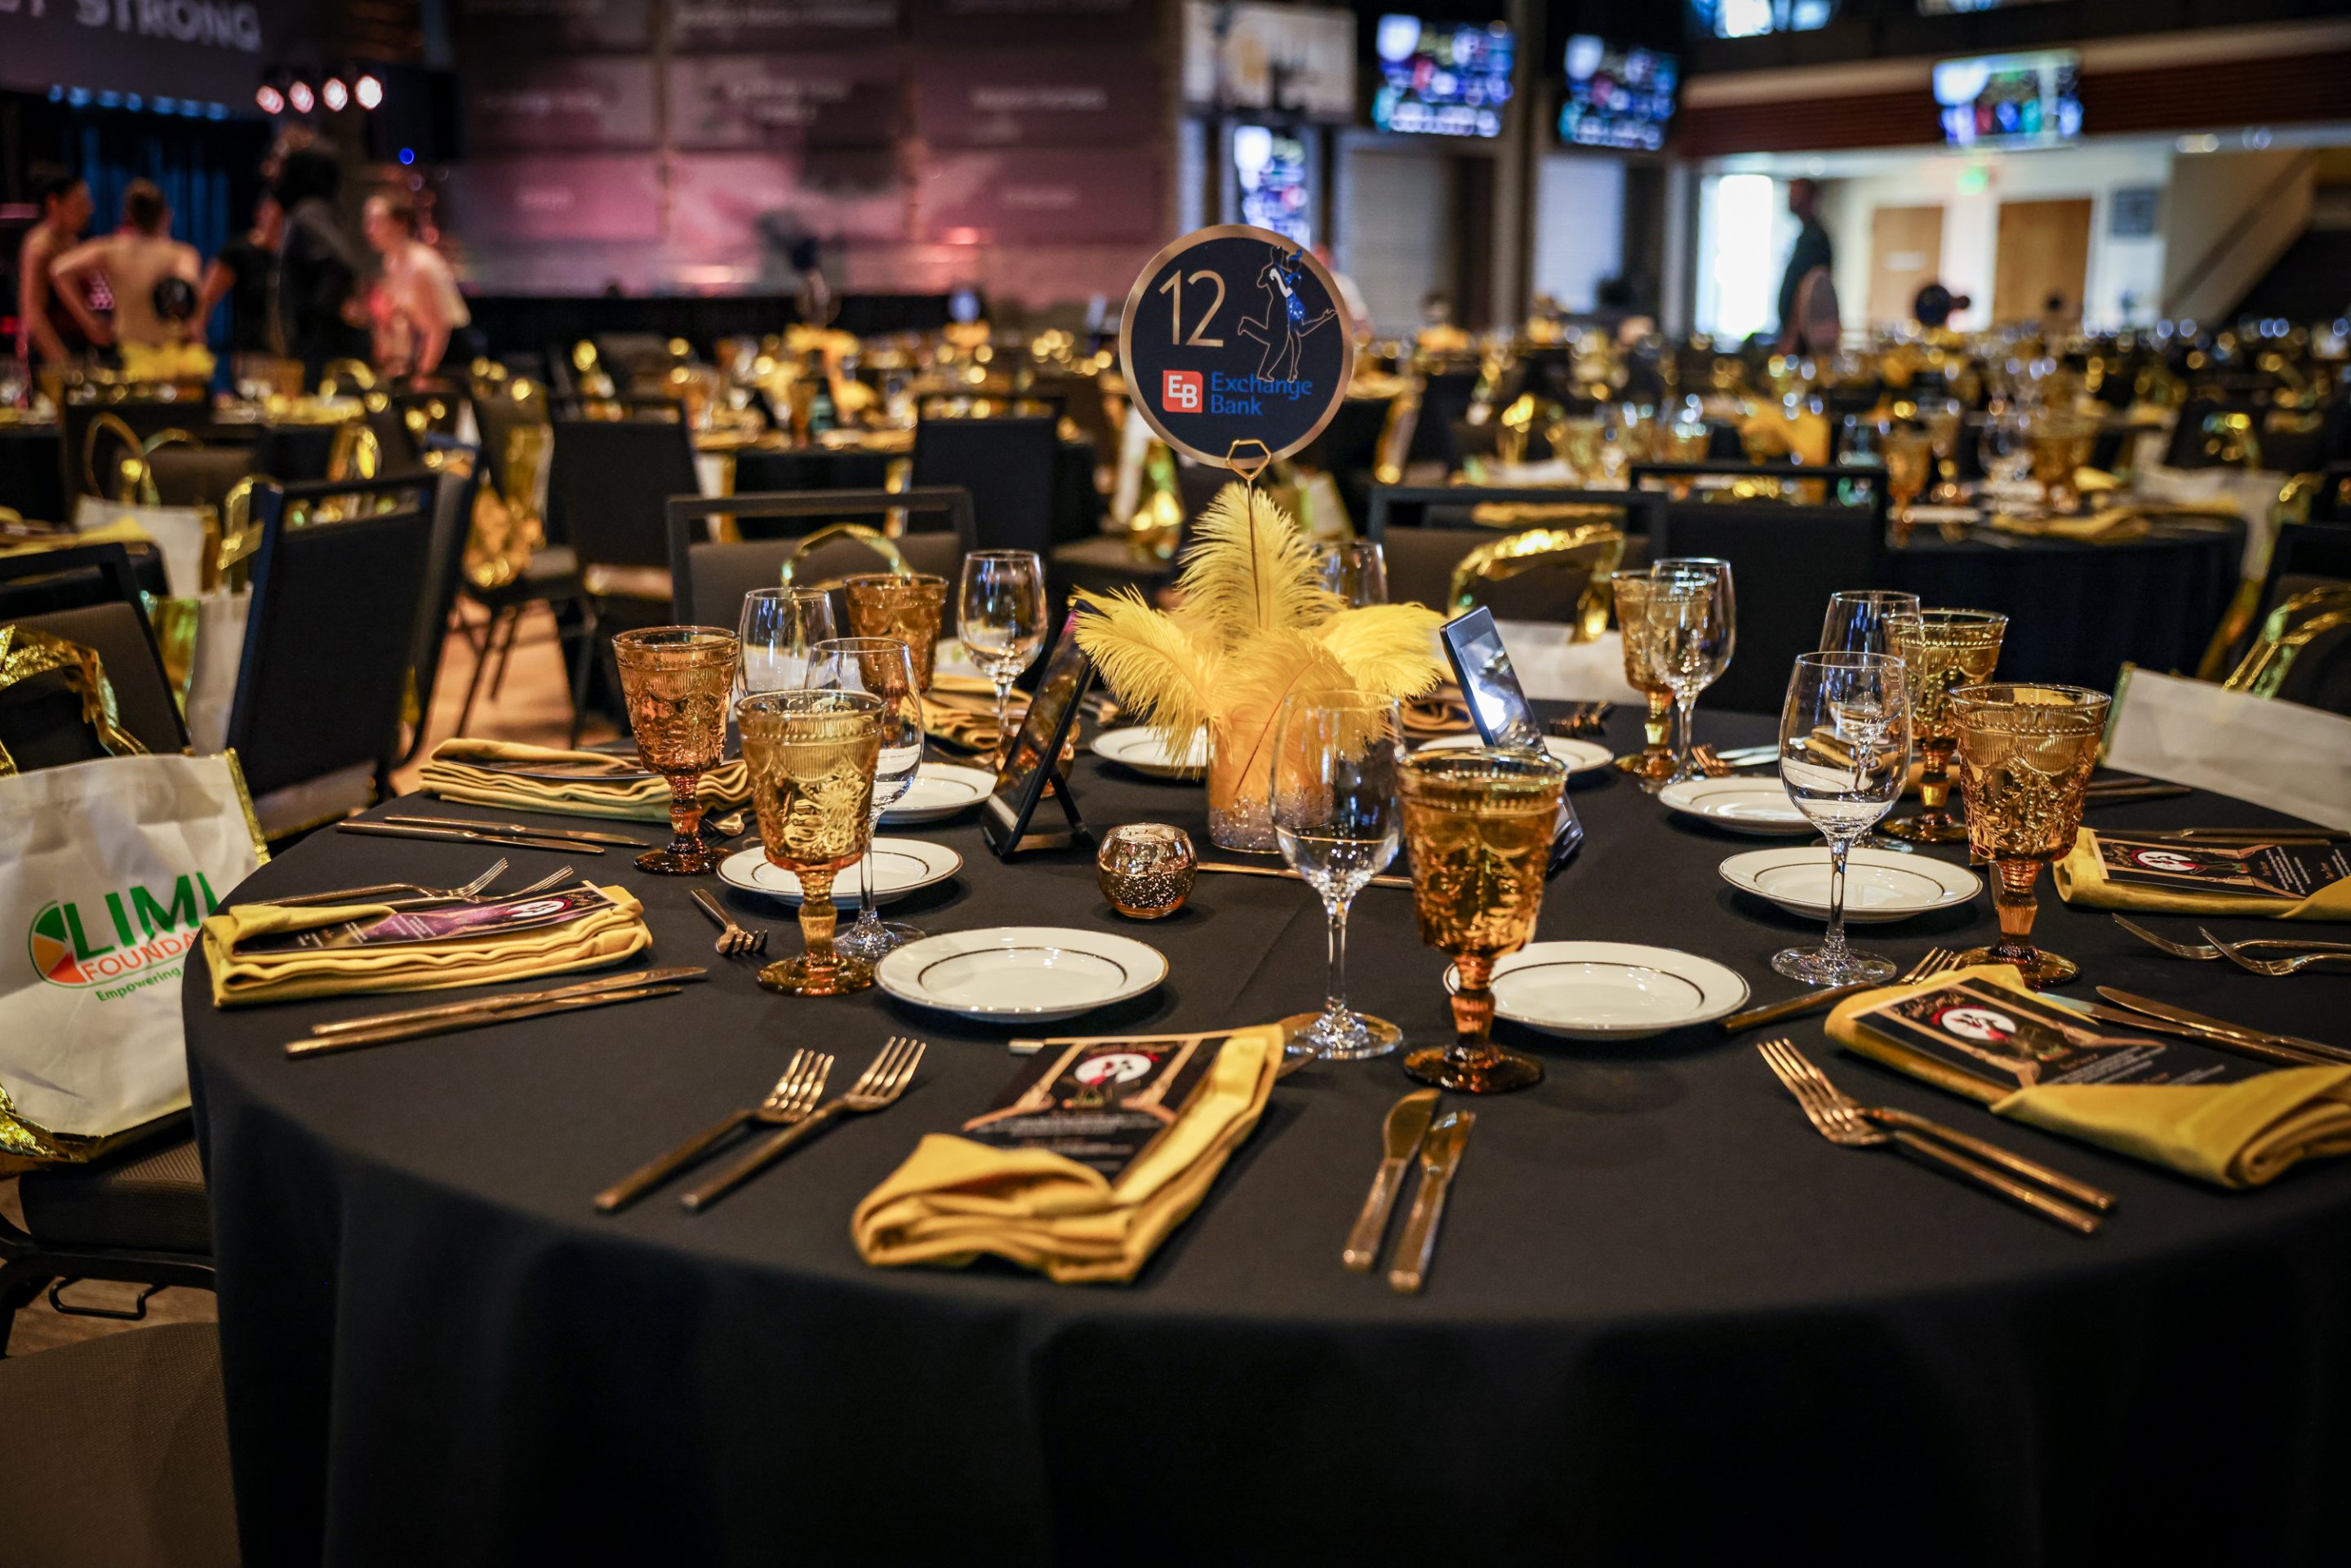 A black and gold table setting at a banquet hall for The LIME Foundation of Santa Rosa.